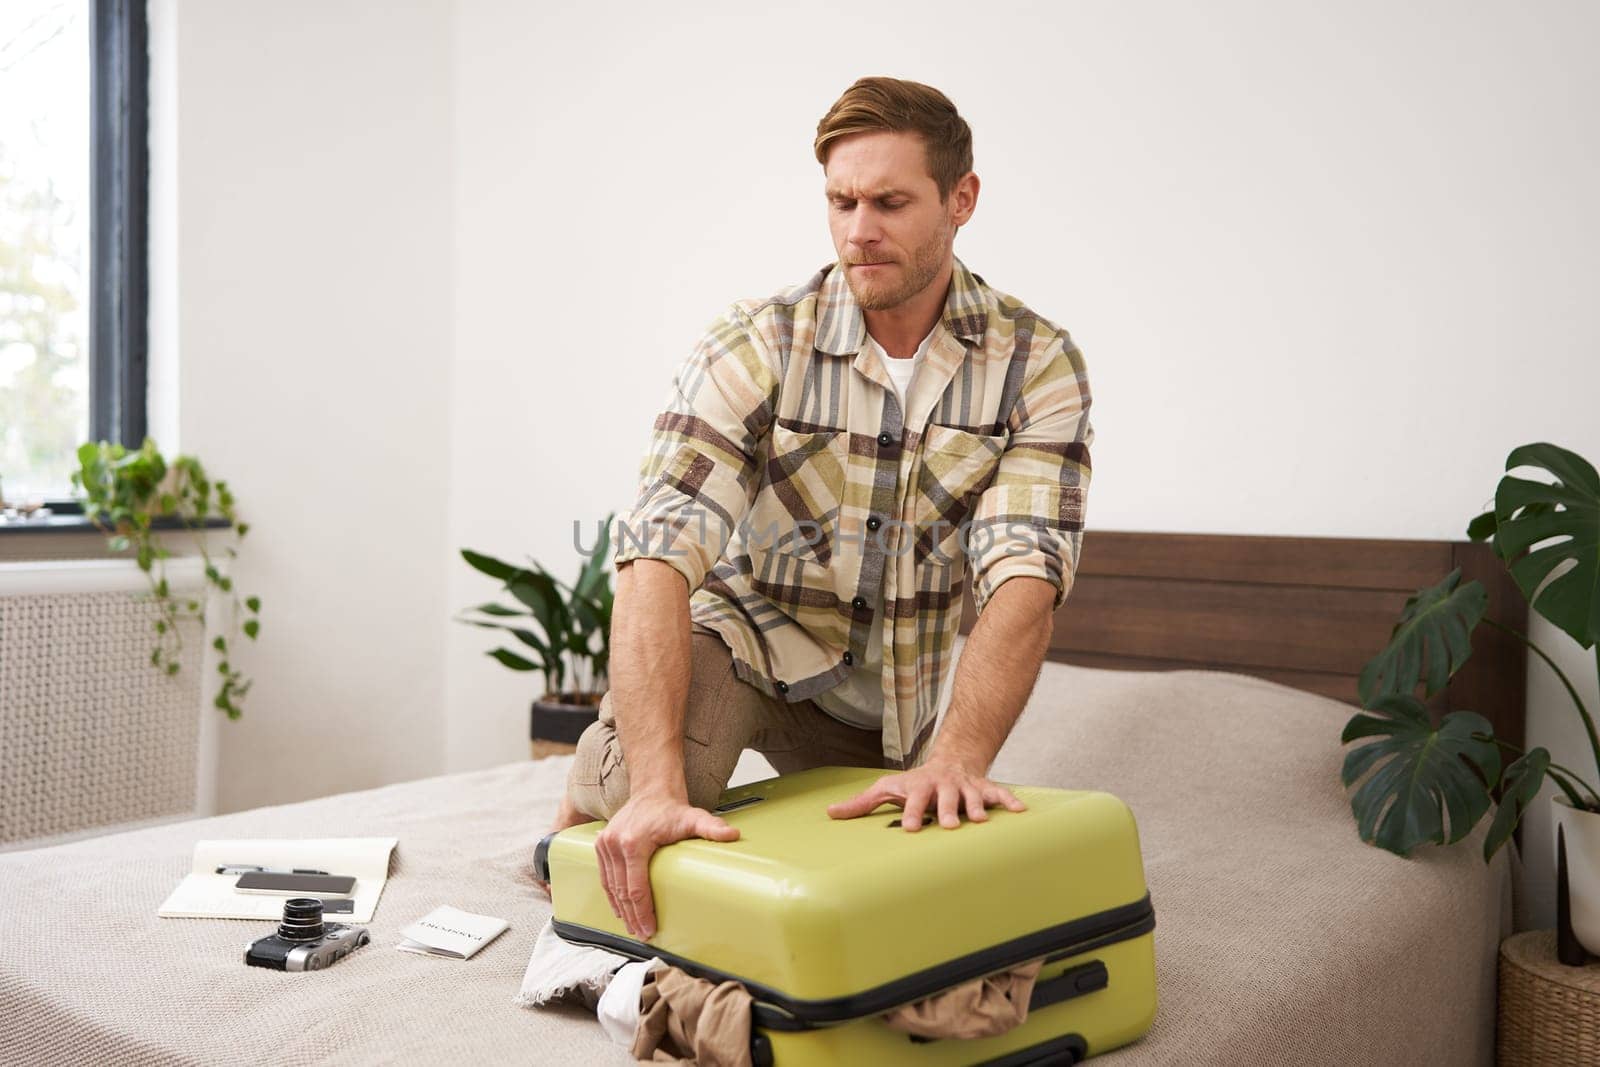 Portrait of young man, tourist packs his bag, closing full suitcase, trying to push the luggage inside to zip the bag, sitting on bed in bedroom. Tourism and adventure concept